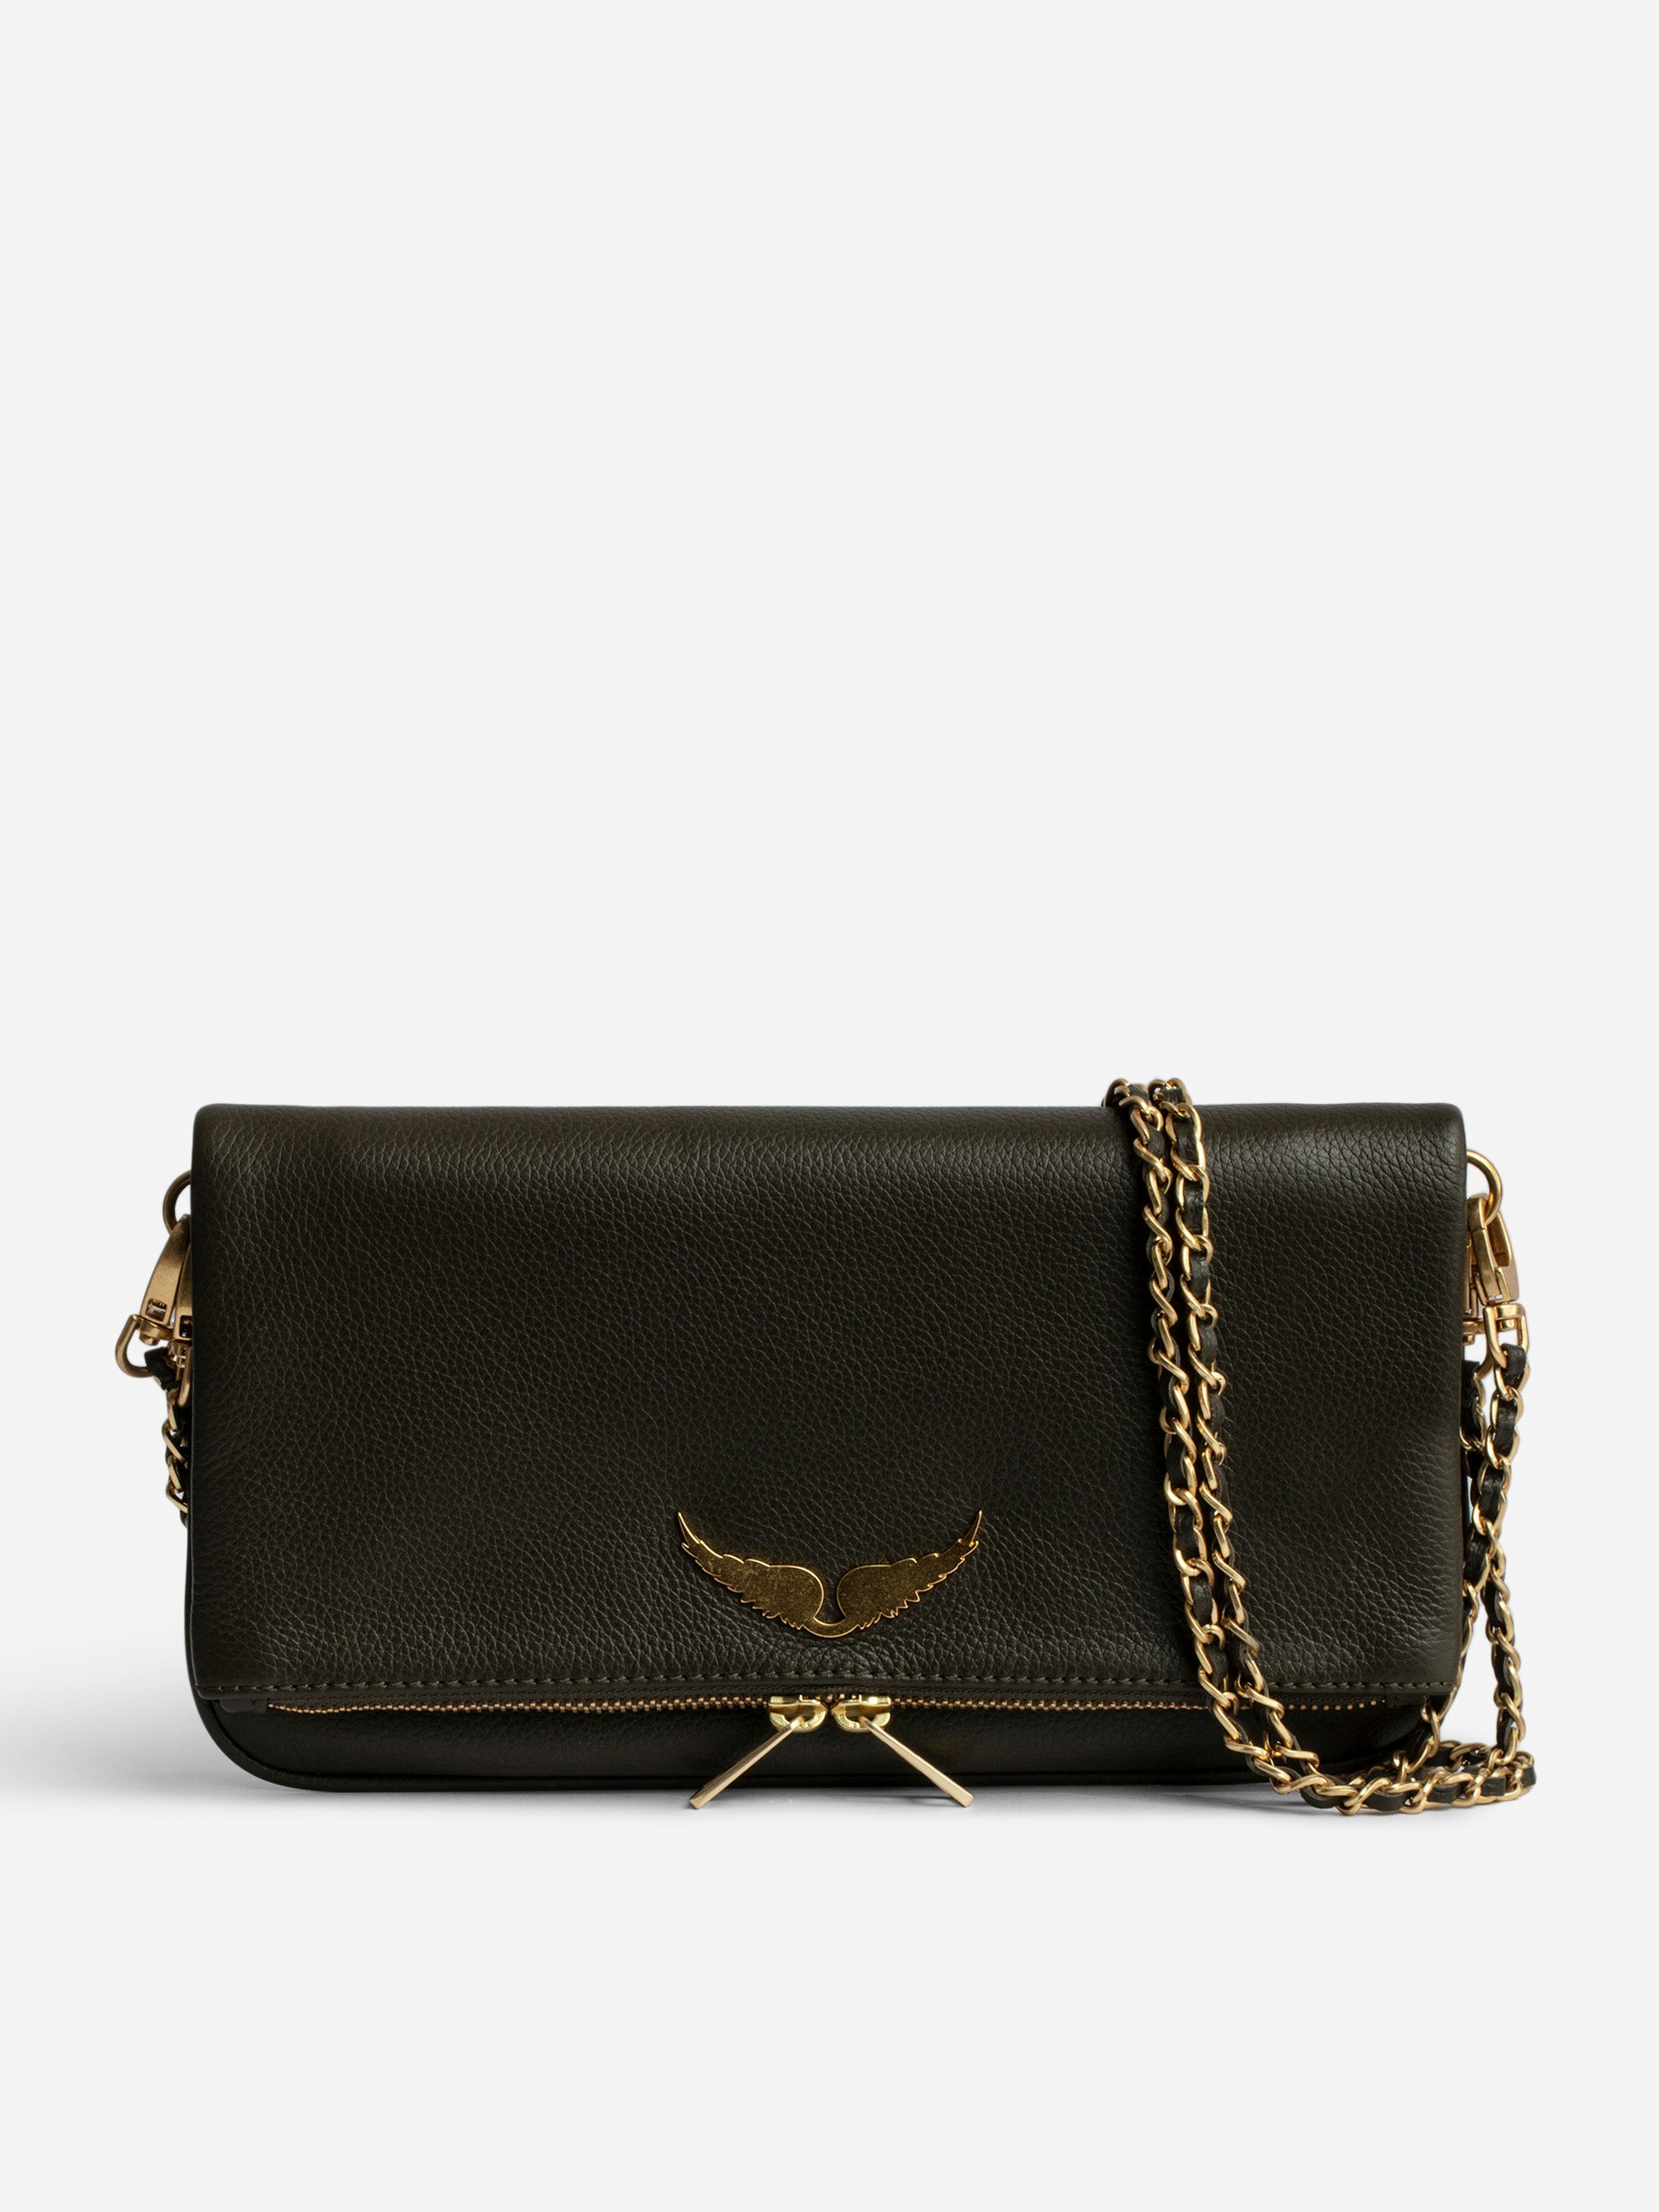 Rock Clutch - Women’s khaki grained leather clutch bag with double leather and gold-tone metal chain strap.